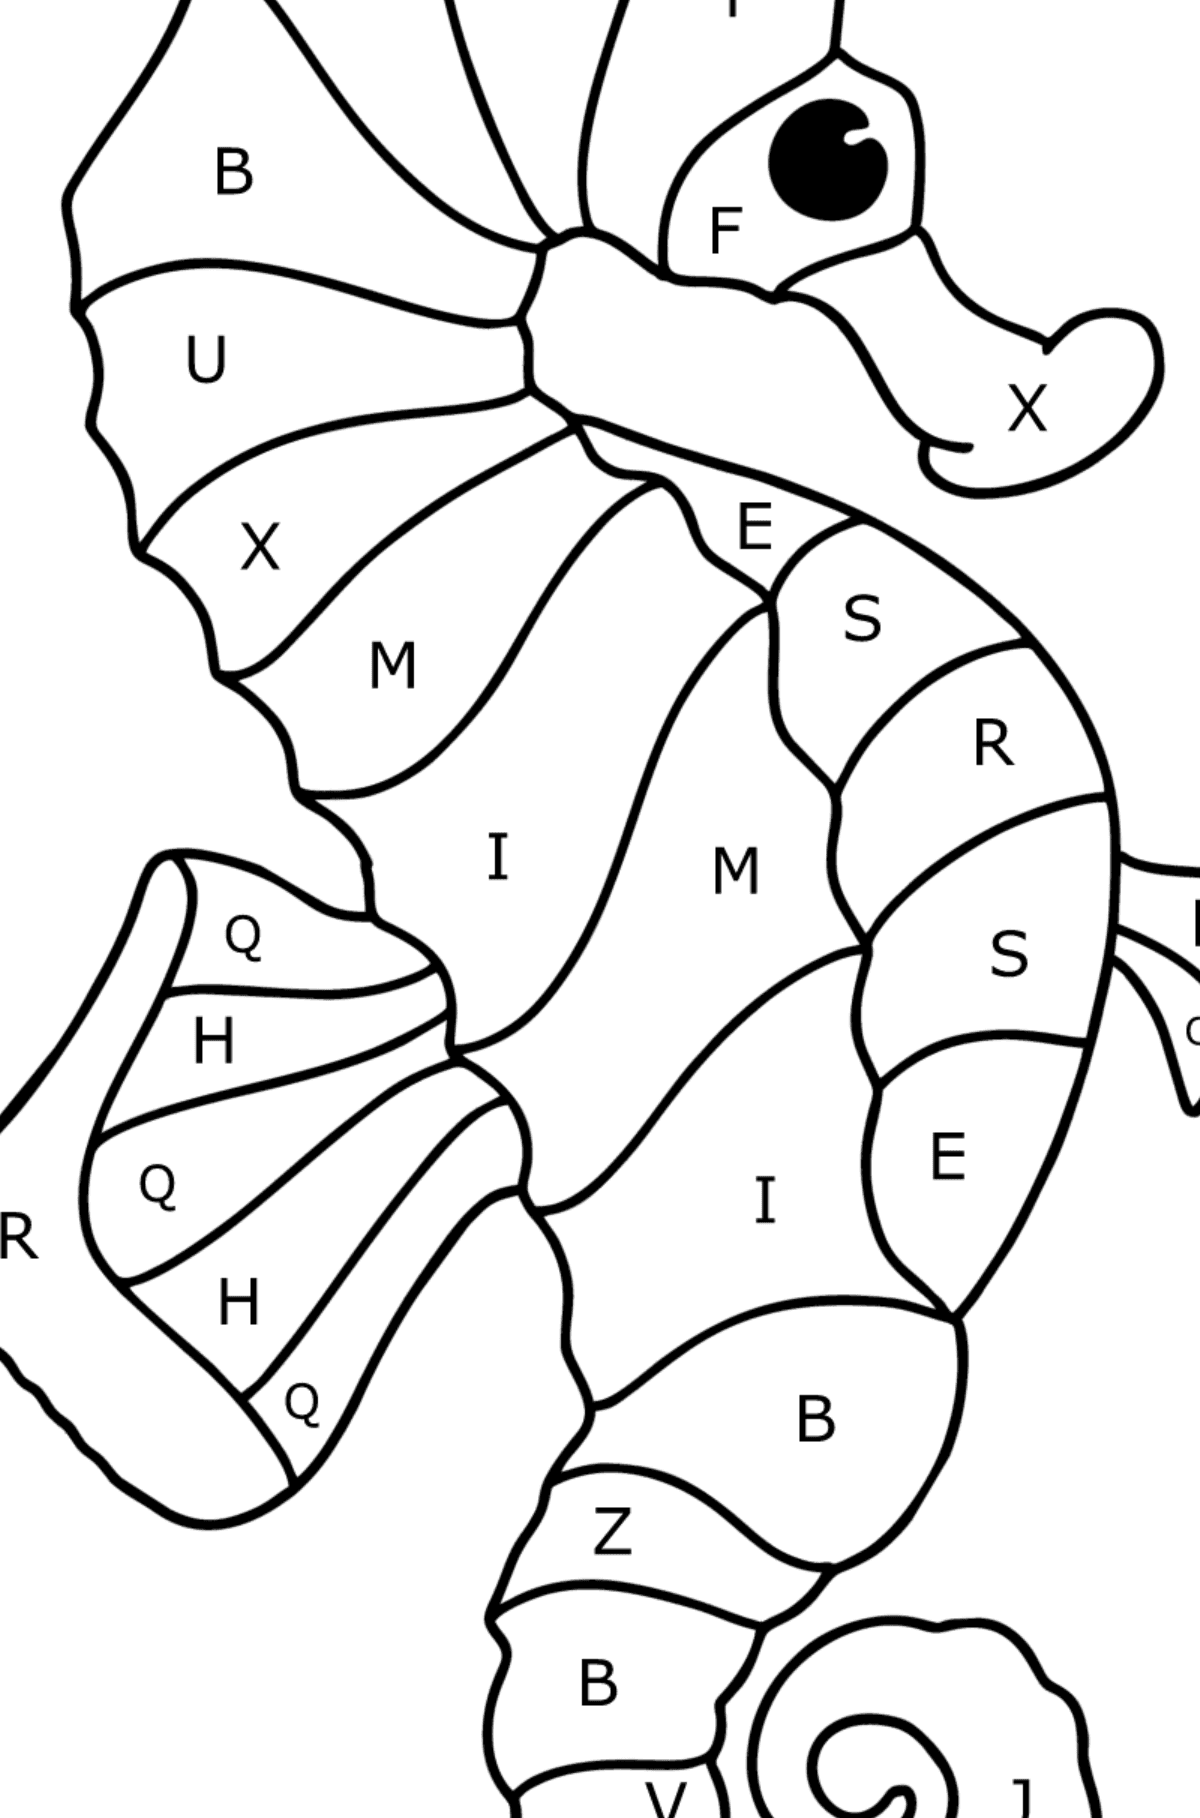 Sea Horse coloring page - Coloring by Letters for Kids